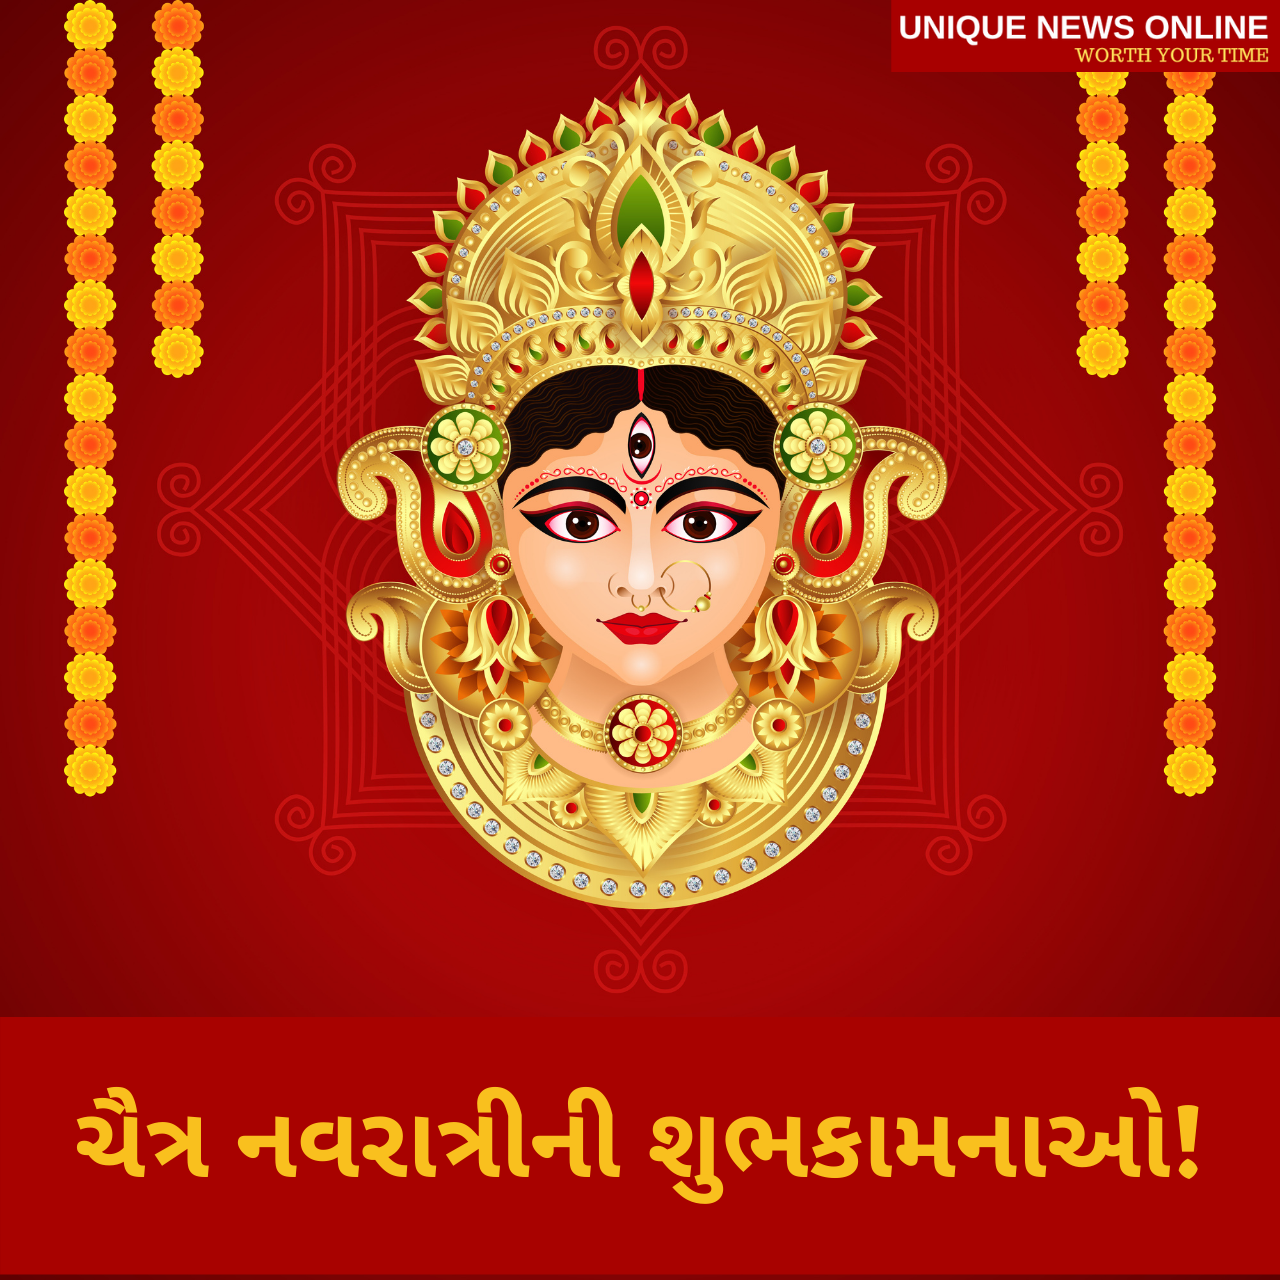 Happy Chaitra Navratri 2021 Images in Gujarati, Wishes, Messages, Greetings, and Quotes to share